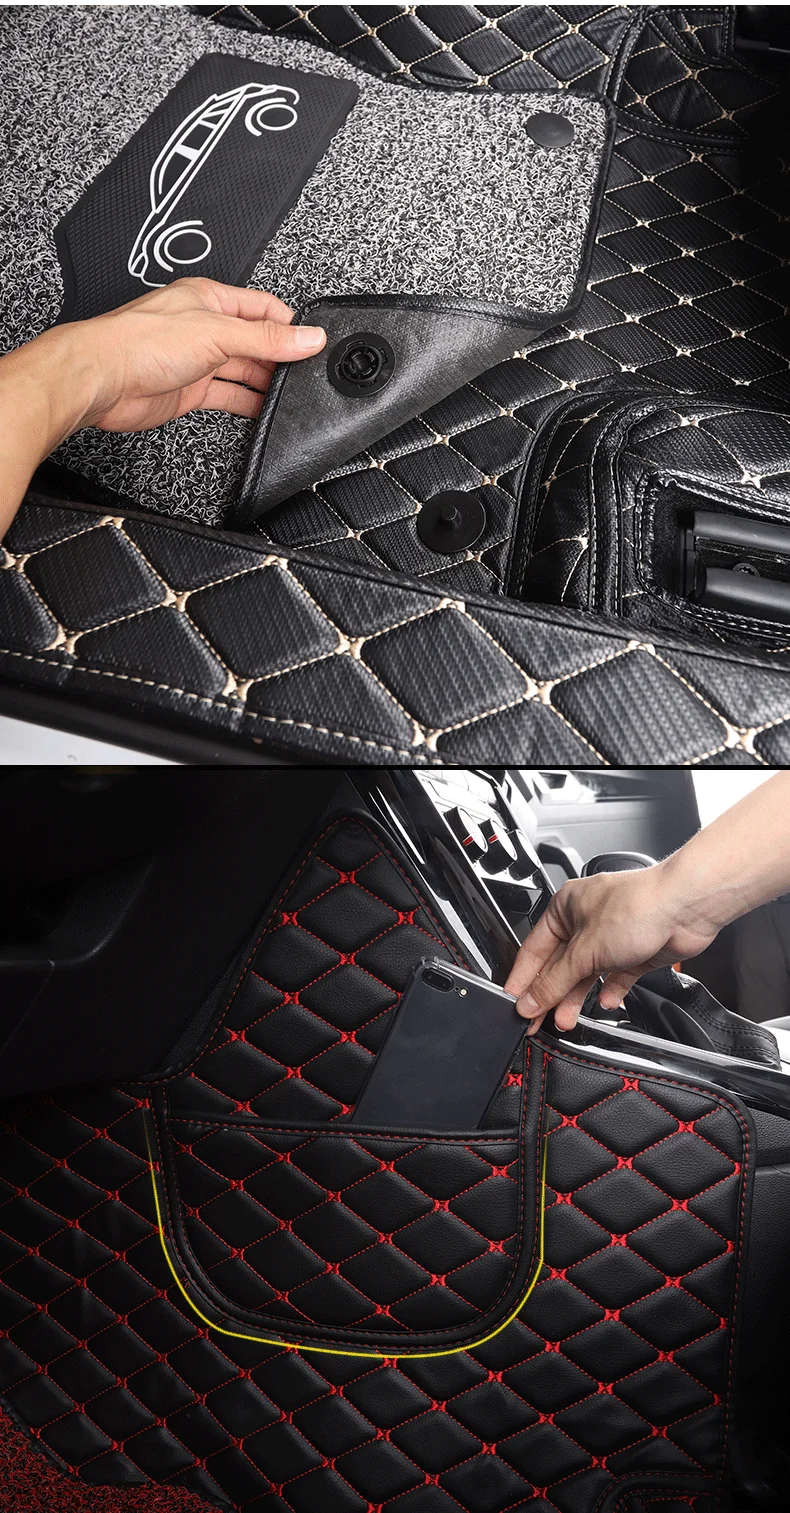 lsrtw2017 leather car interior floor mat for volkswagen t-roc accessories interior styling stickers covers